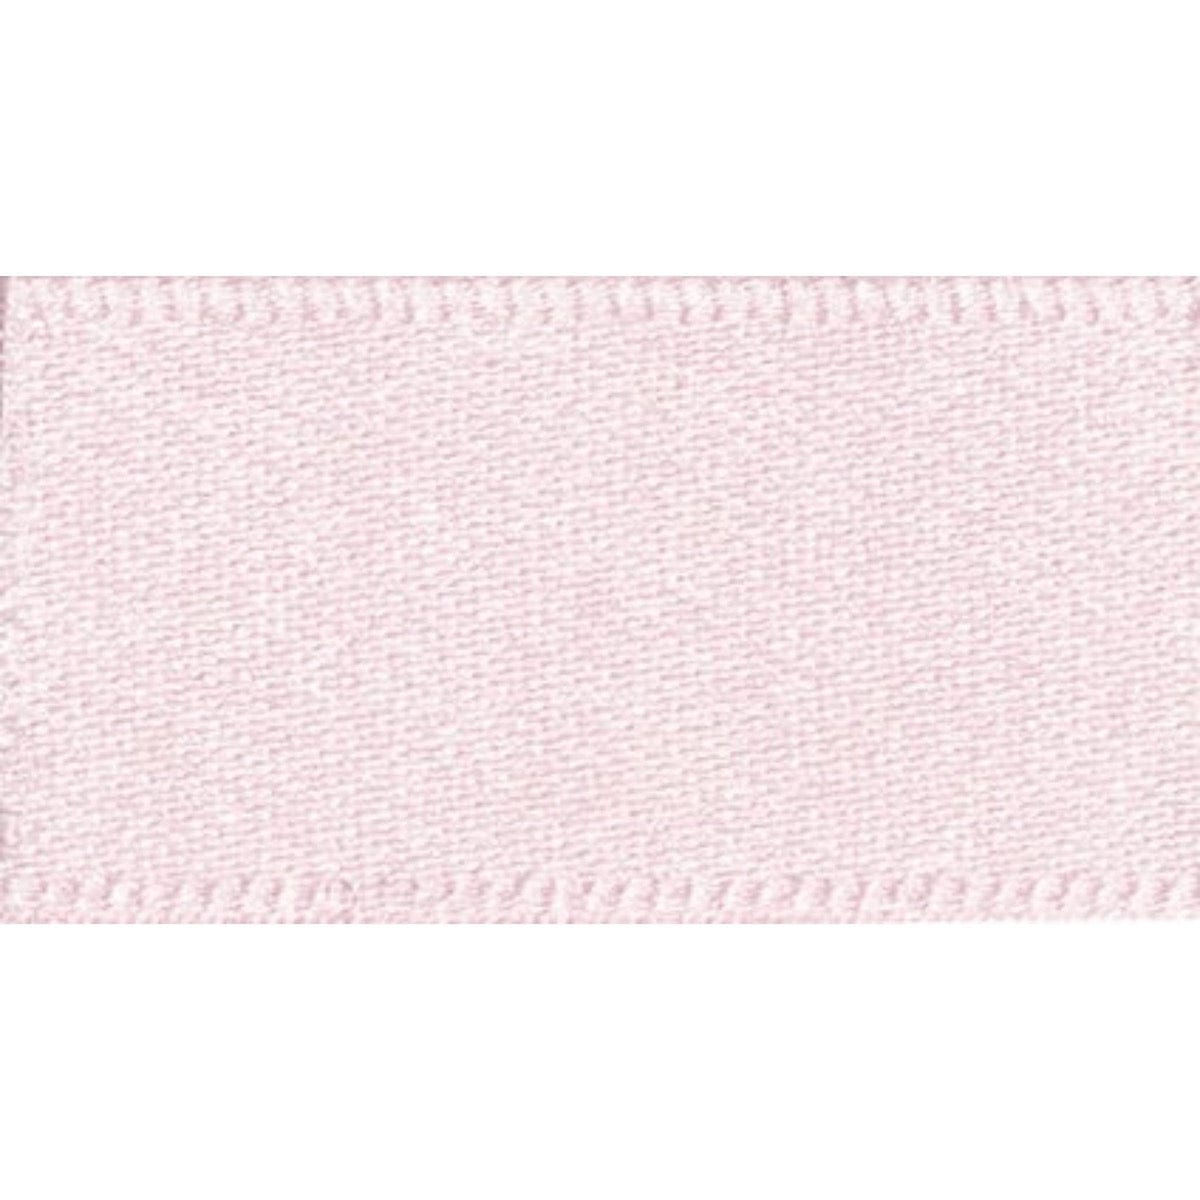 Double Faced Satin Ribbon Pale Pink: 10mm wide. Price per metre.